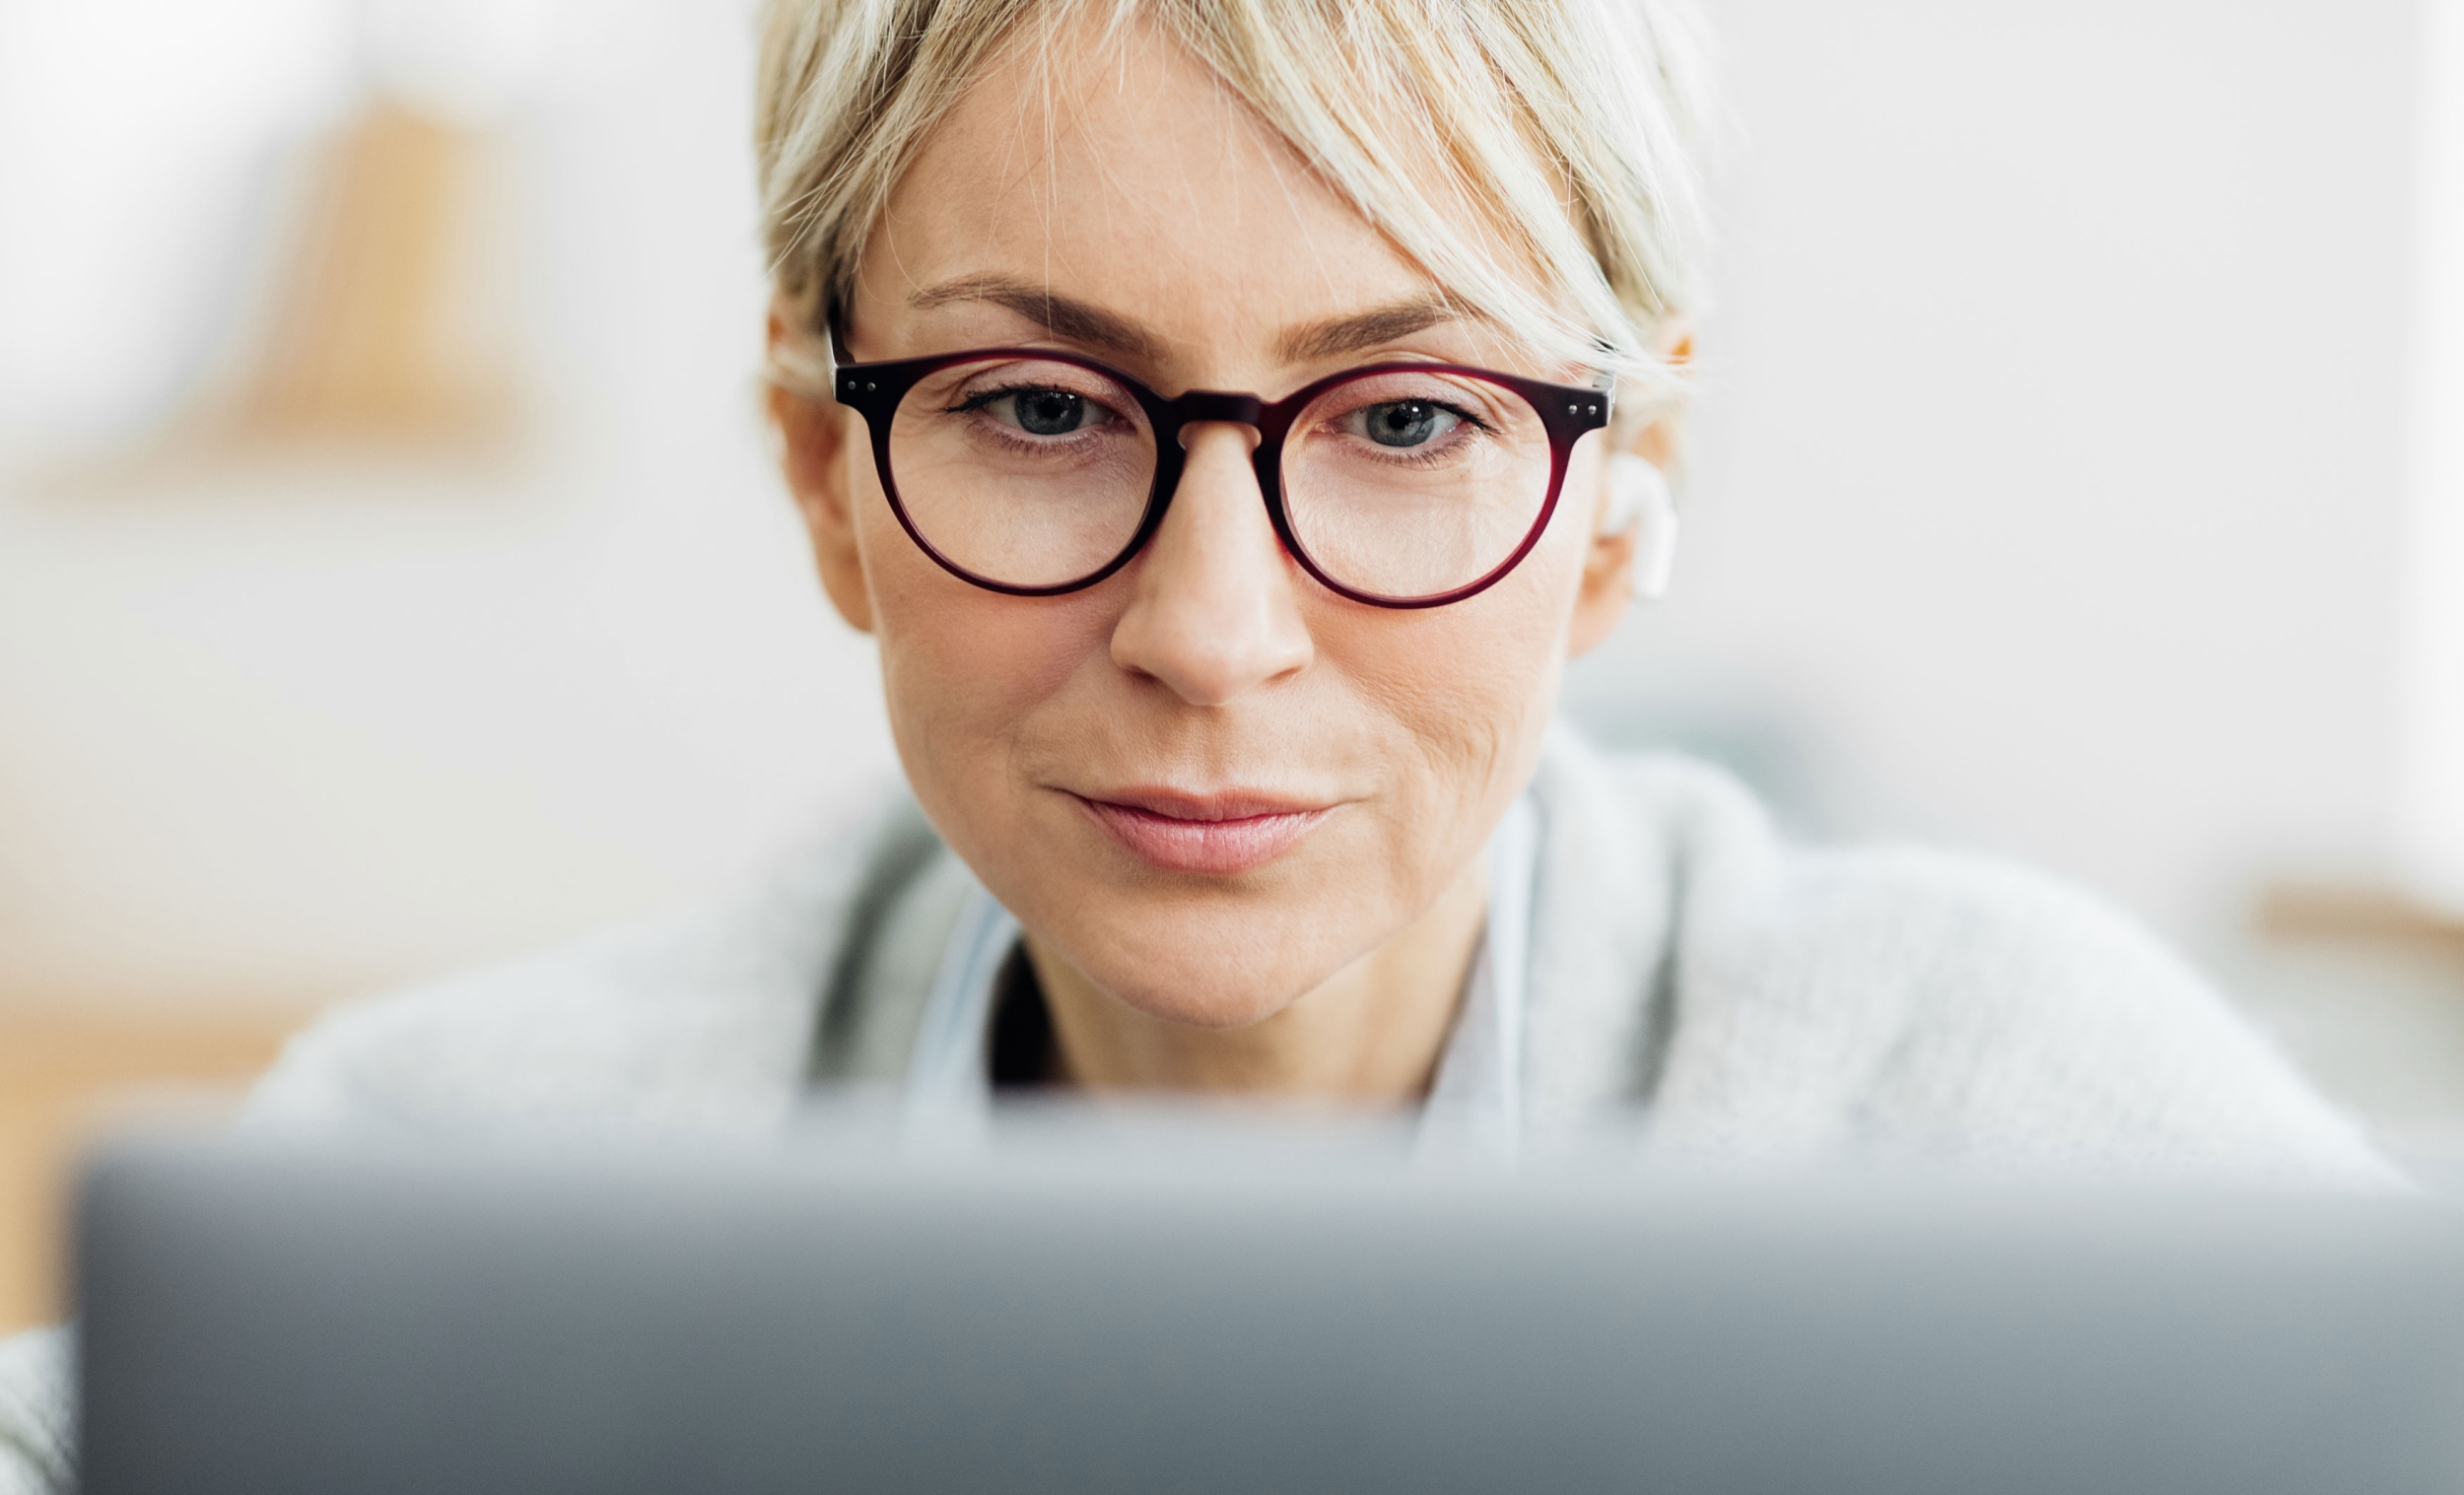 A middle-aged woman wearing glasses is smiling and looking at a laptop in front of her.